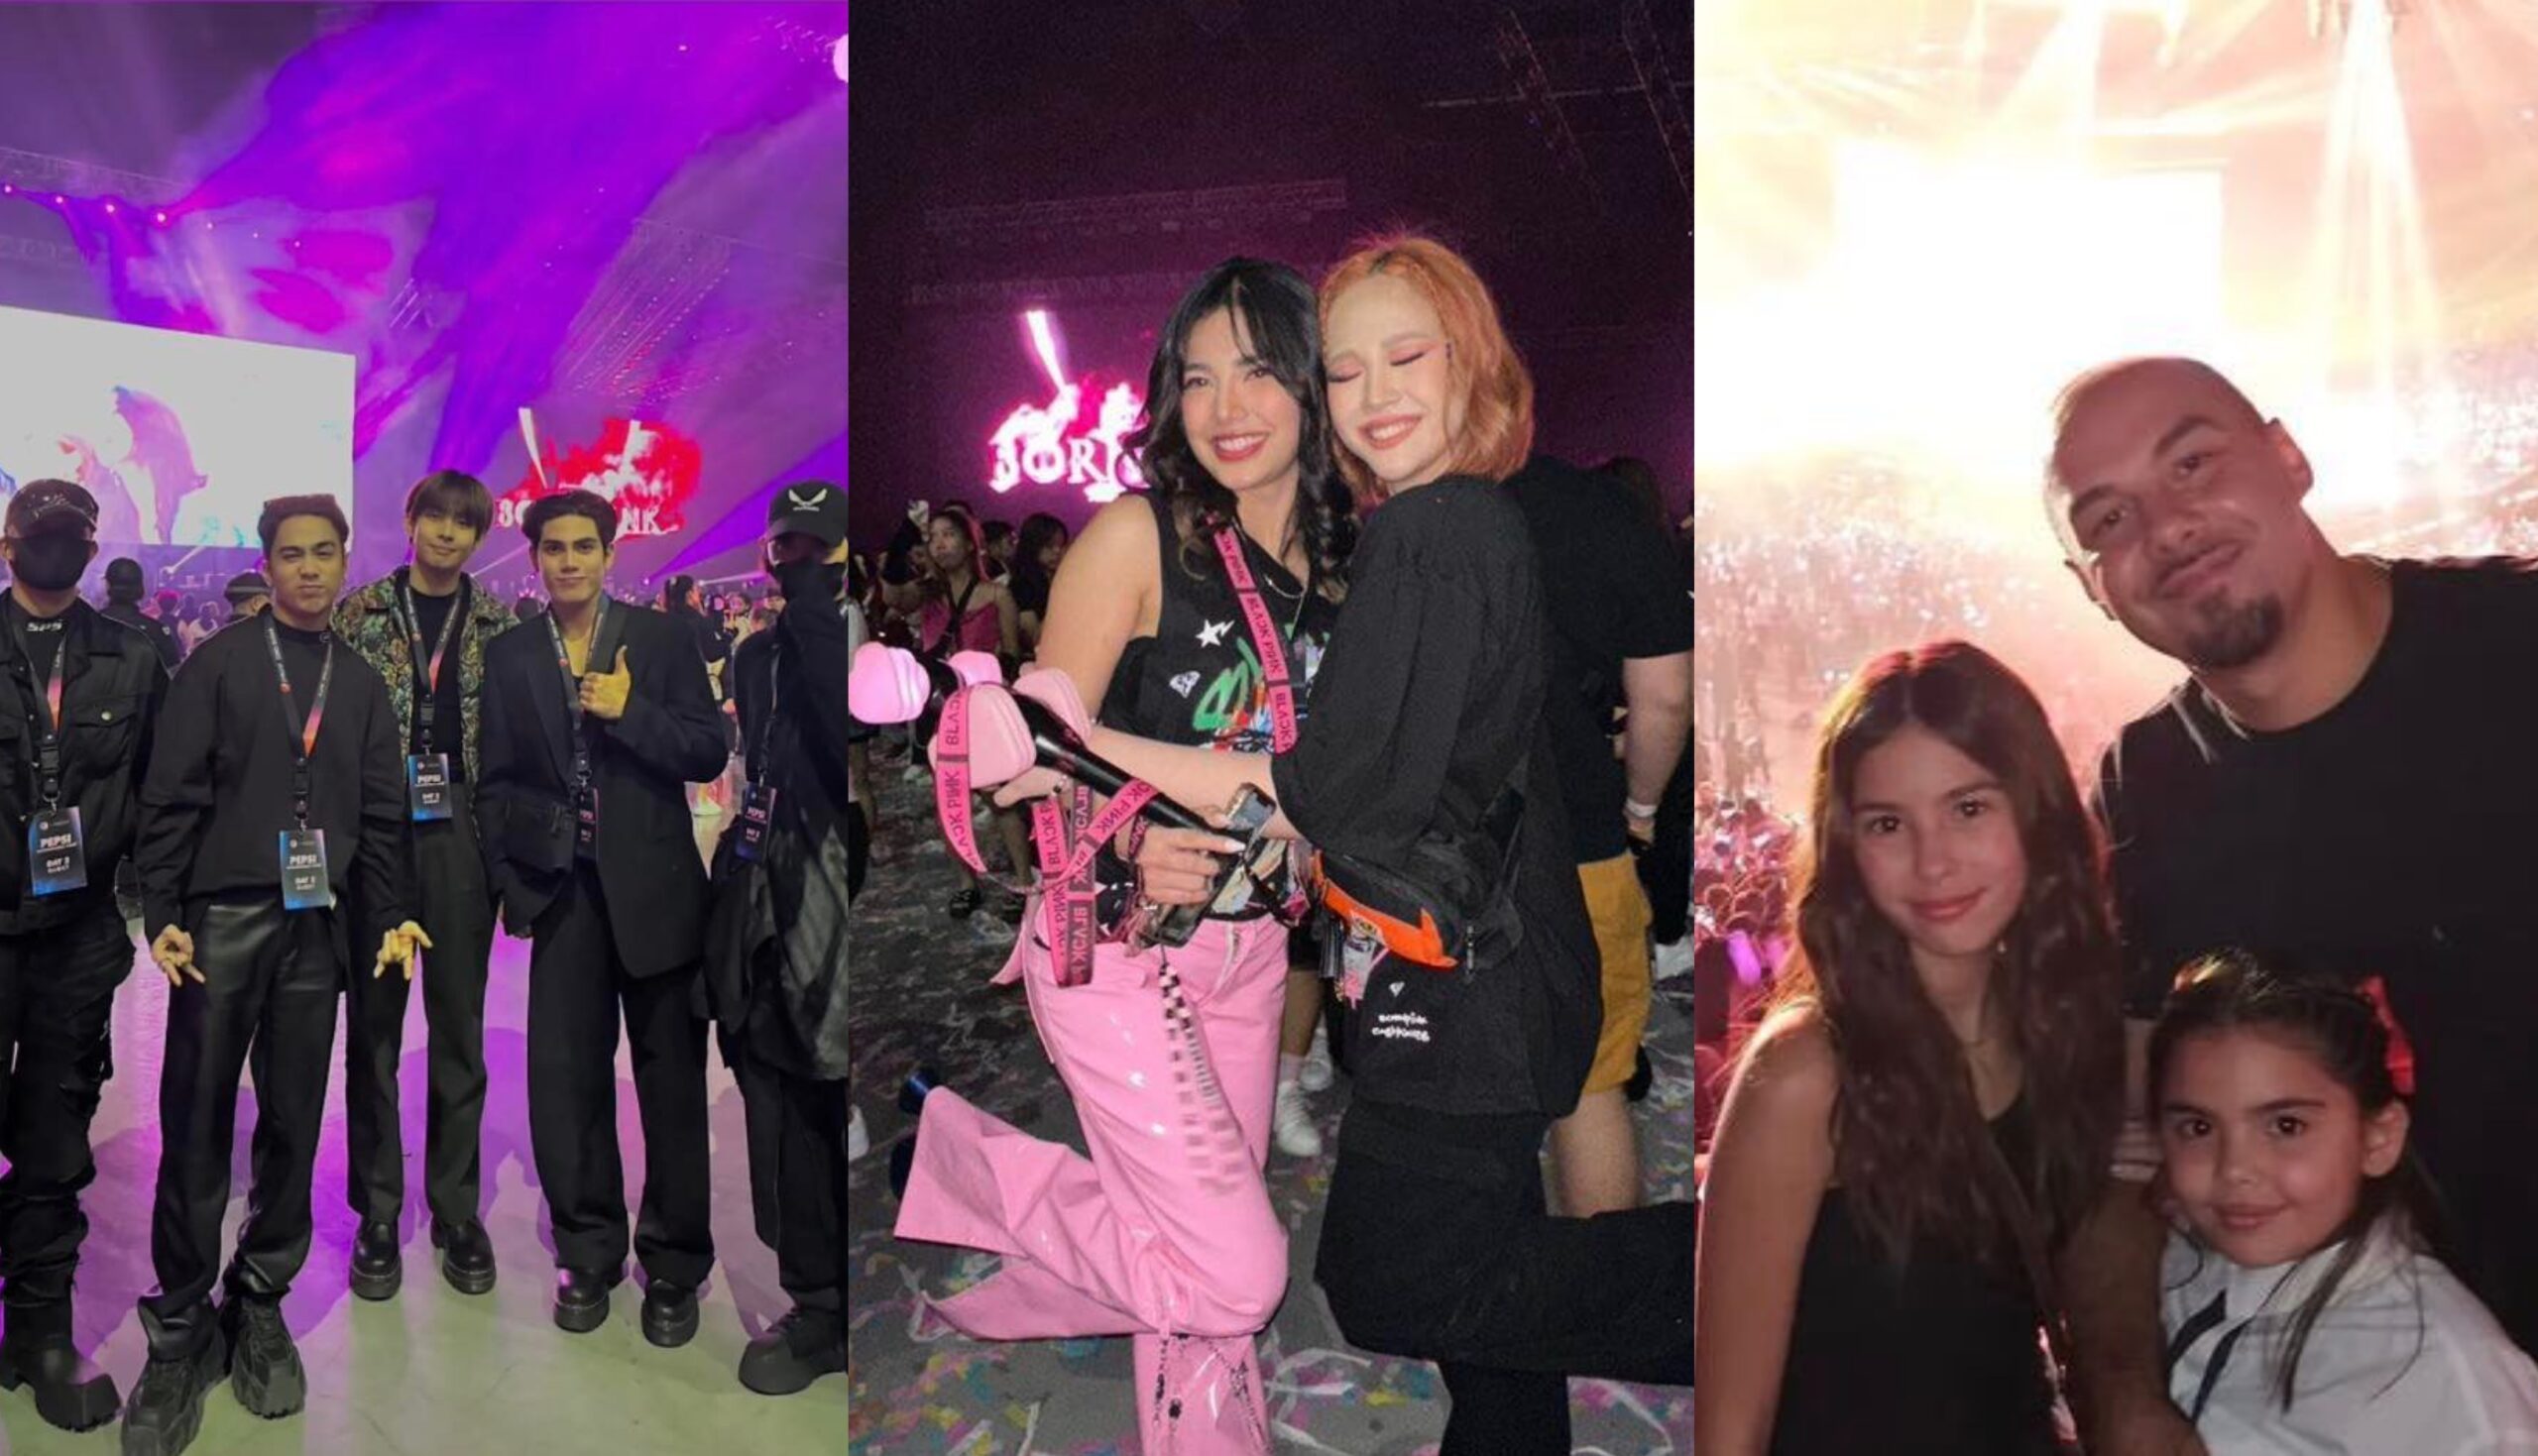 BLACKPINK in our area: SB19, JaneNella, and local celebs attend ‘BORN PINK’ concert in PH Arena 